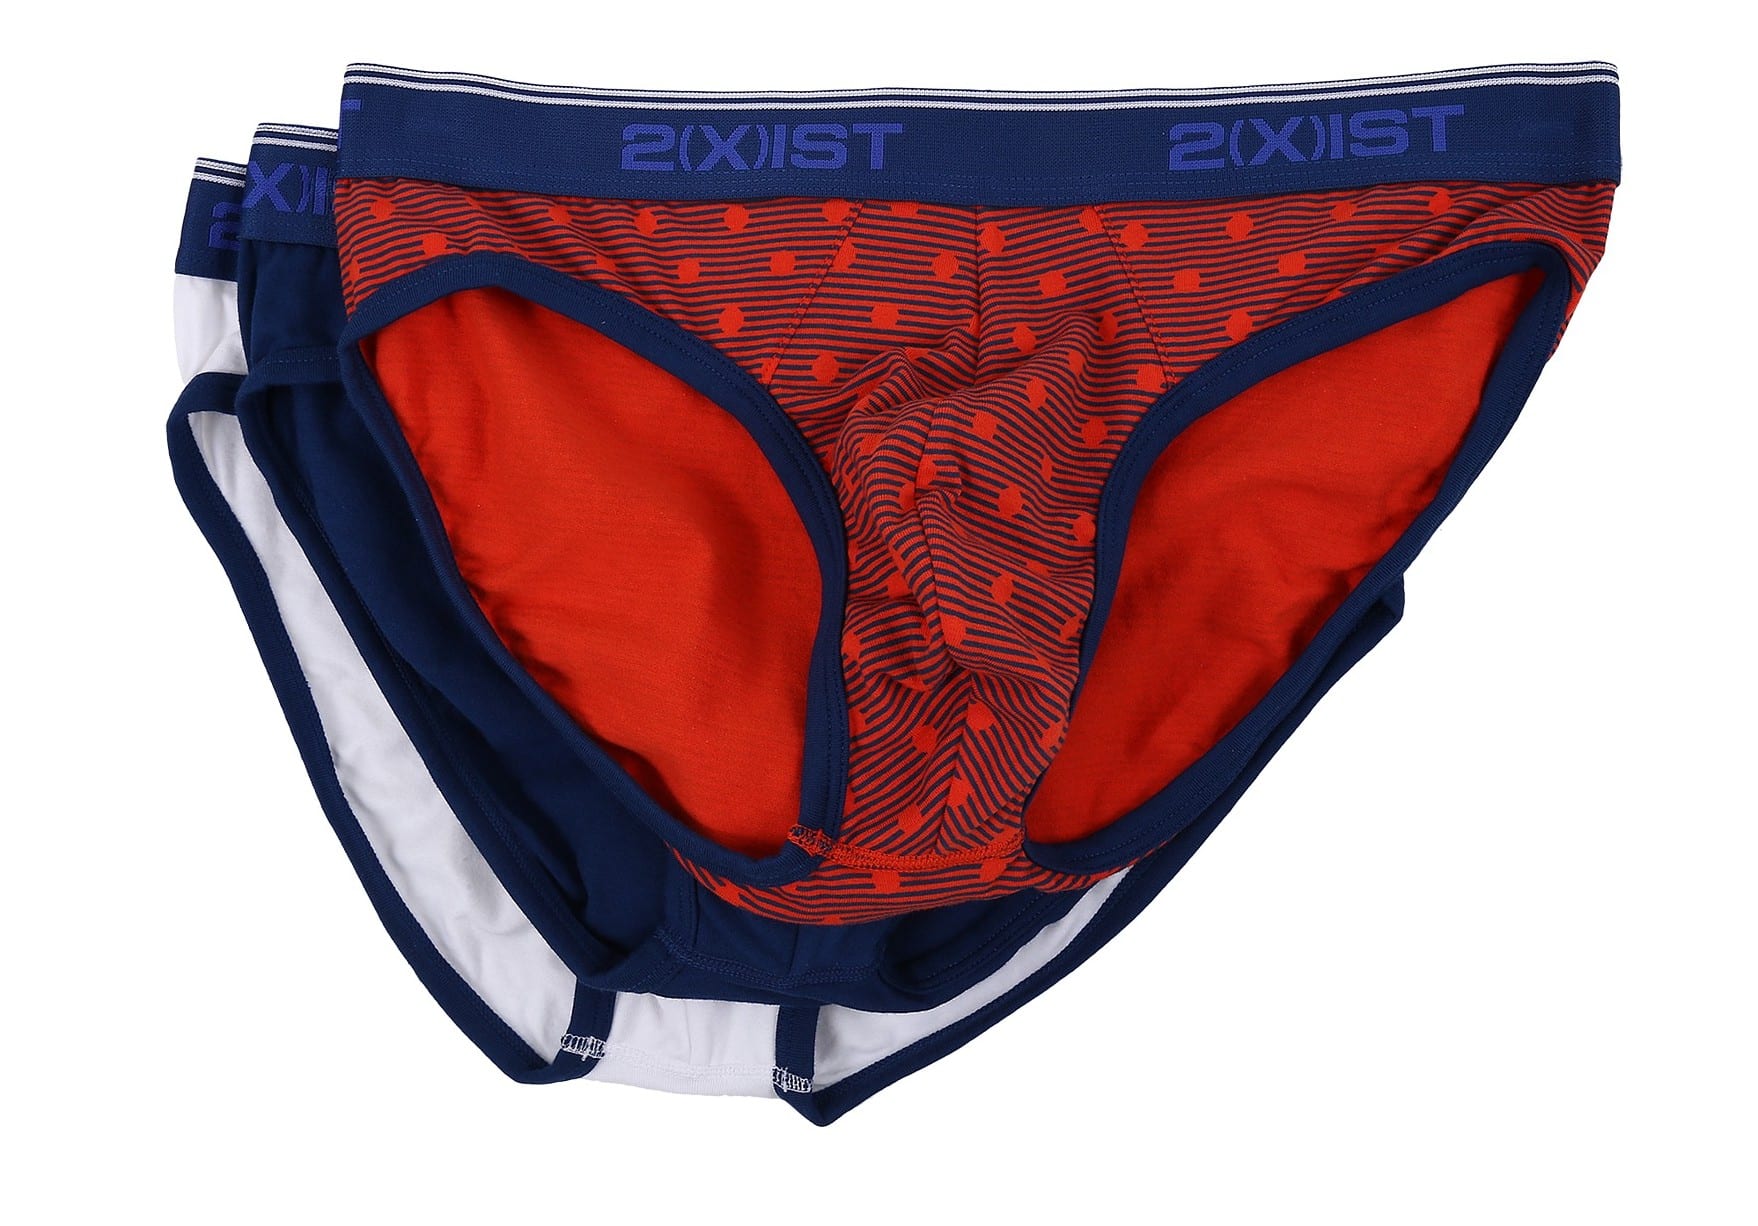 2(Xist) 3-Pack of Mens Briefs 2016